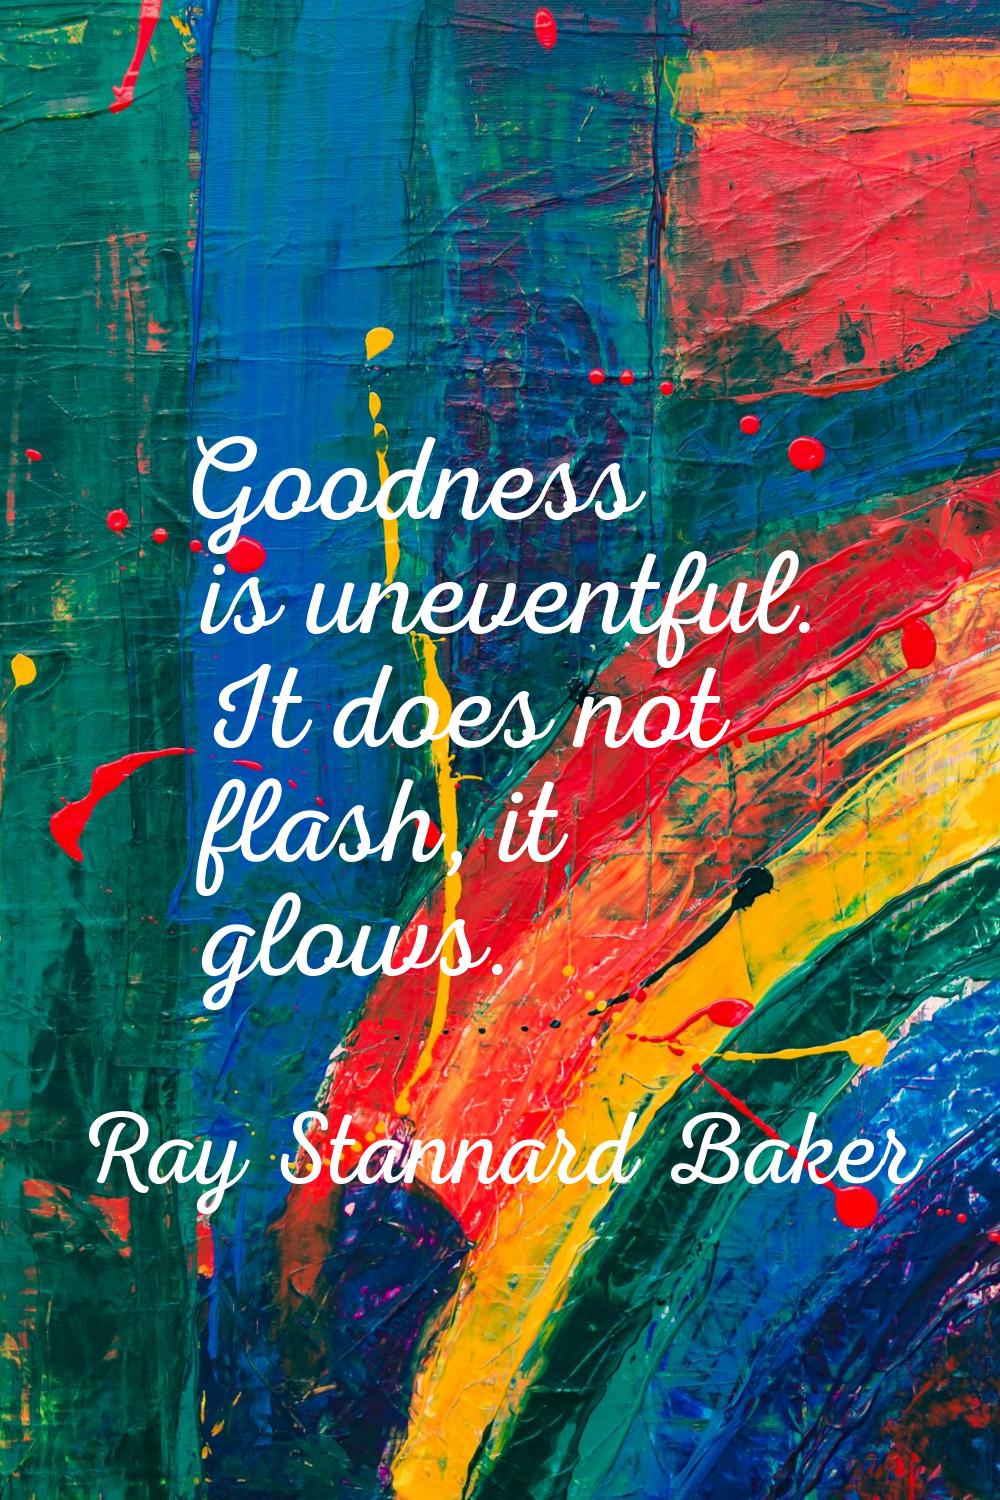 Goodness is uneventful. It does not flash, it glows.